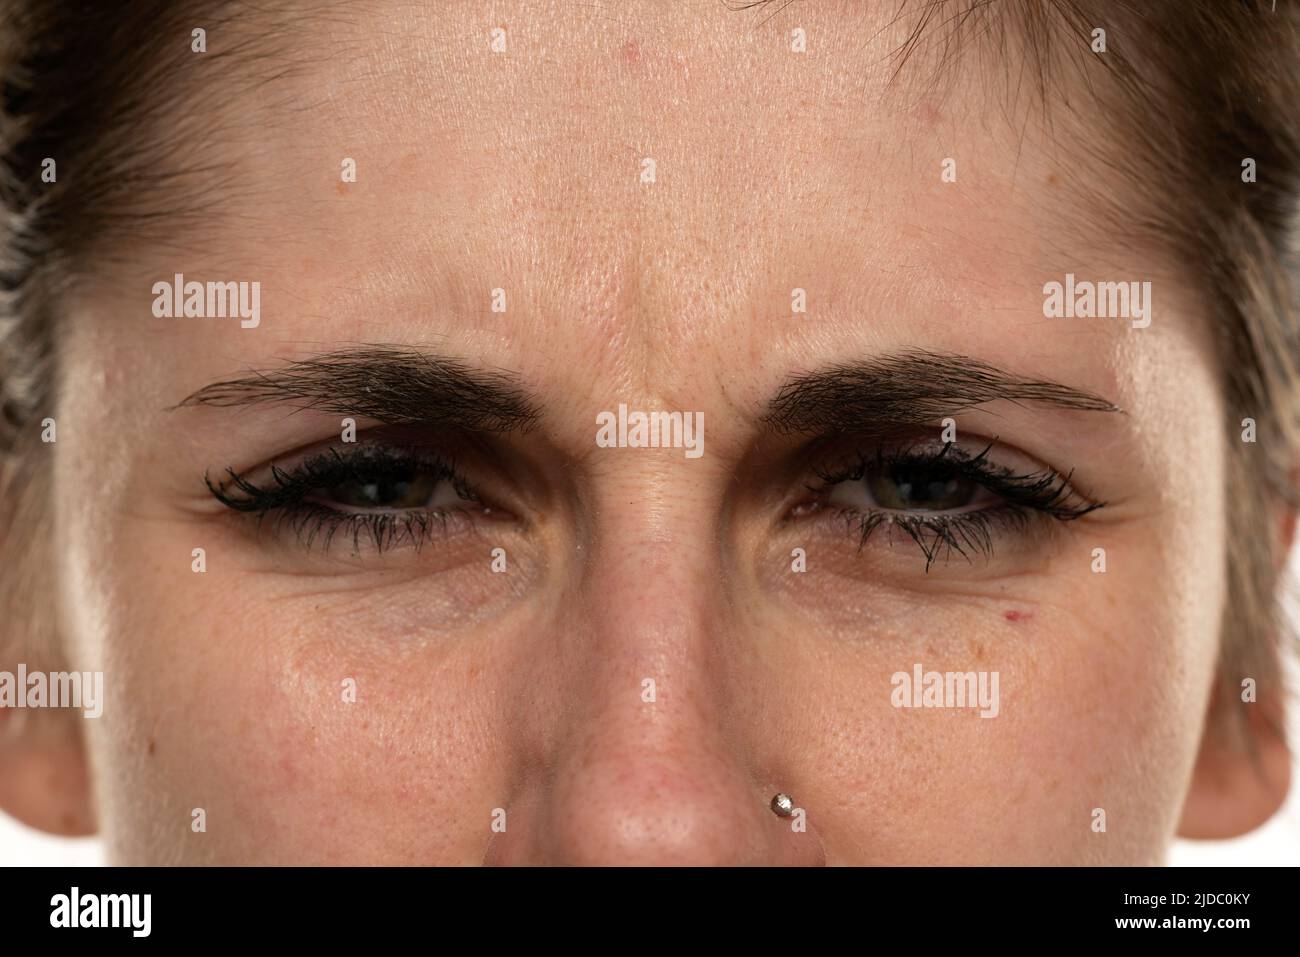 Angry face of a young woman with facial wrinkles closeup. Stock Photo